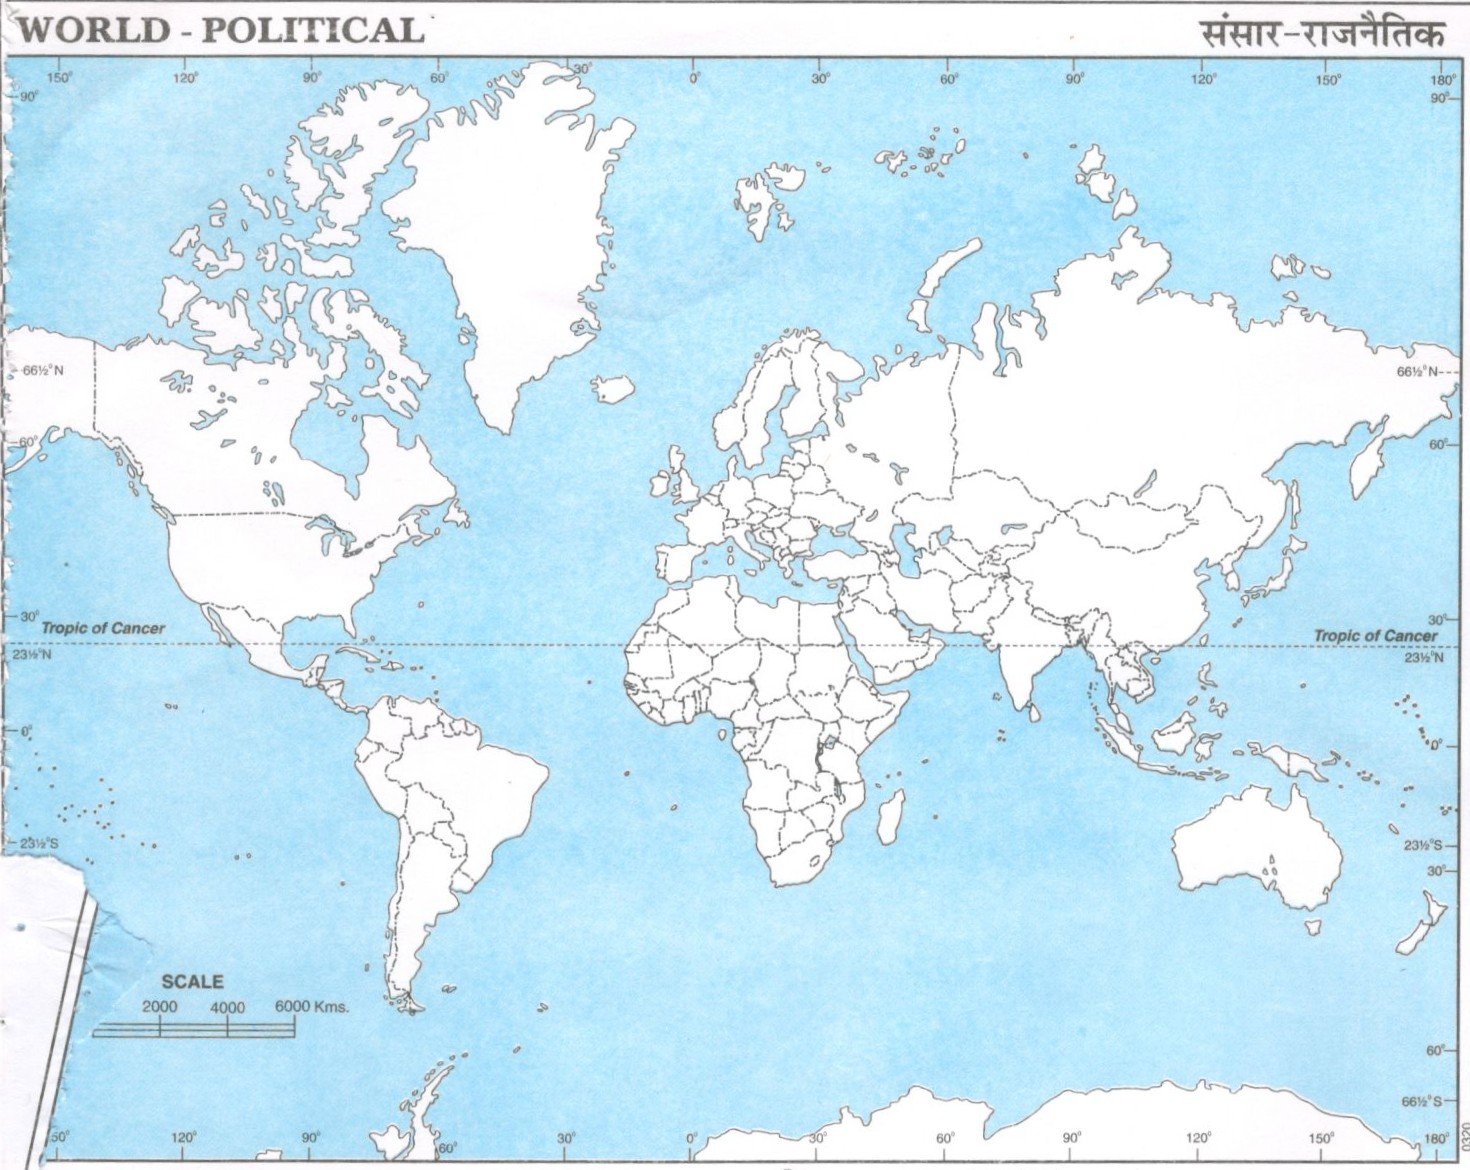 Political Map Of World - Download Pdf Of World Political Map